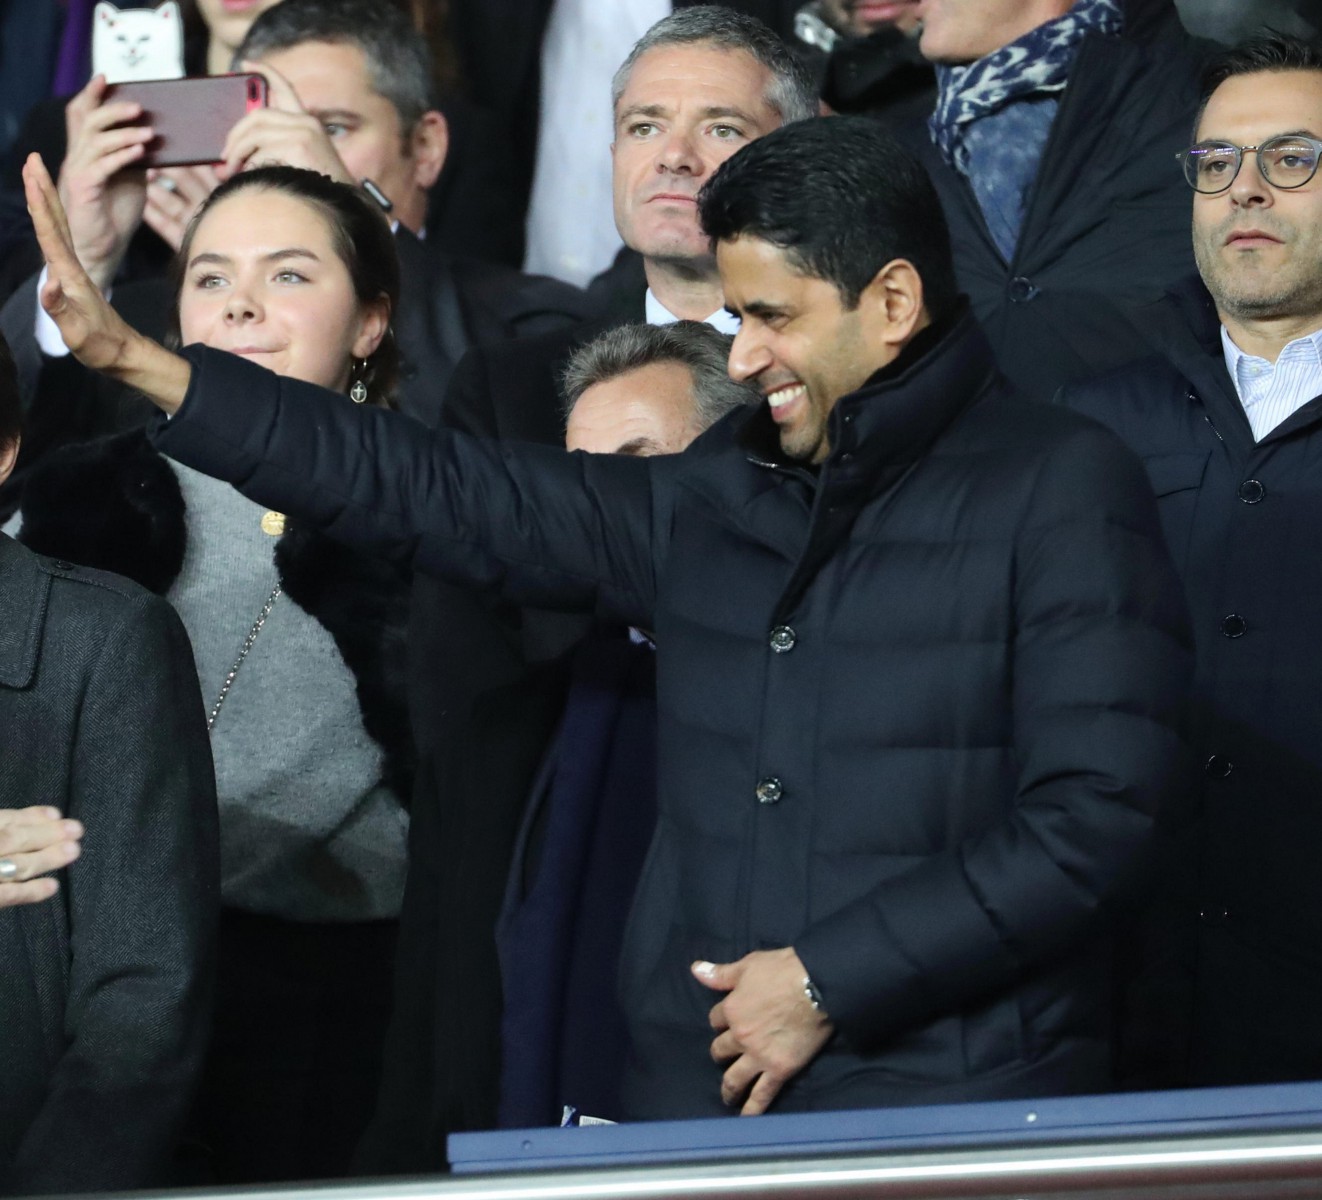 , PSG president Nasser Al-Khelaifi went from son of a fisherman to tennis player to most powerful man in French football